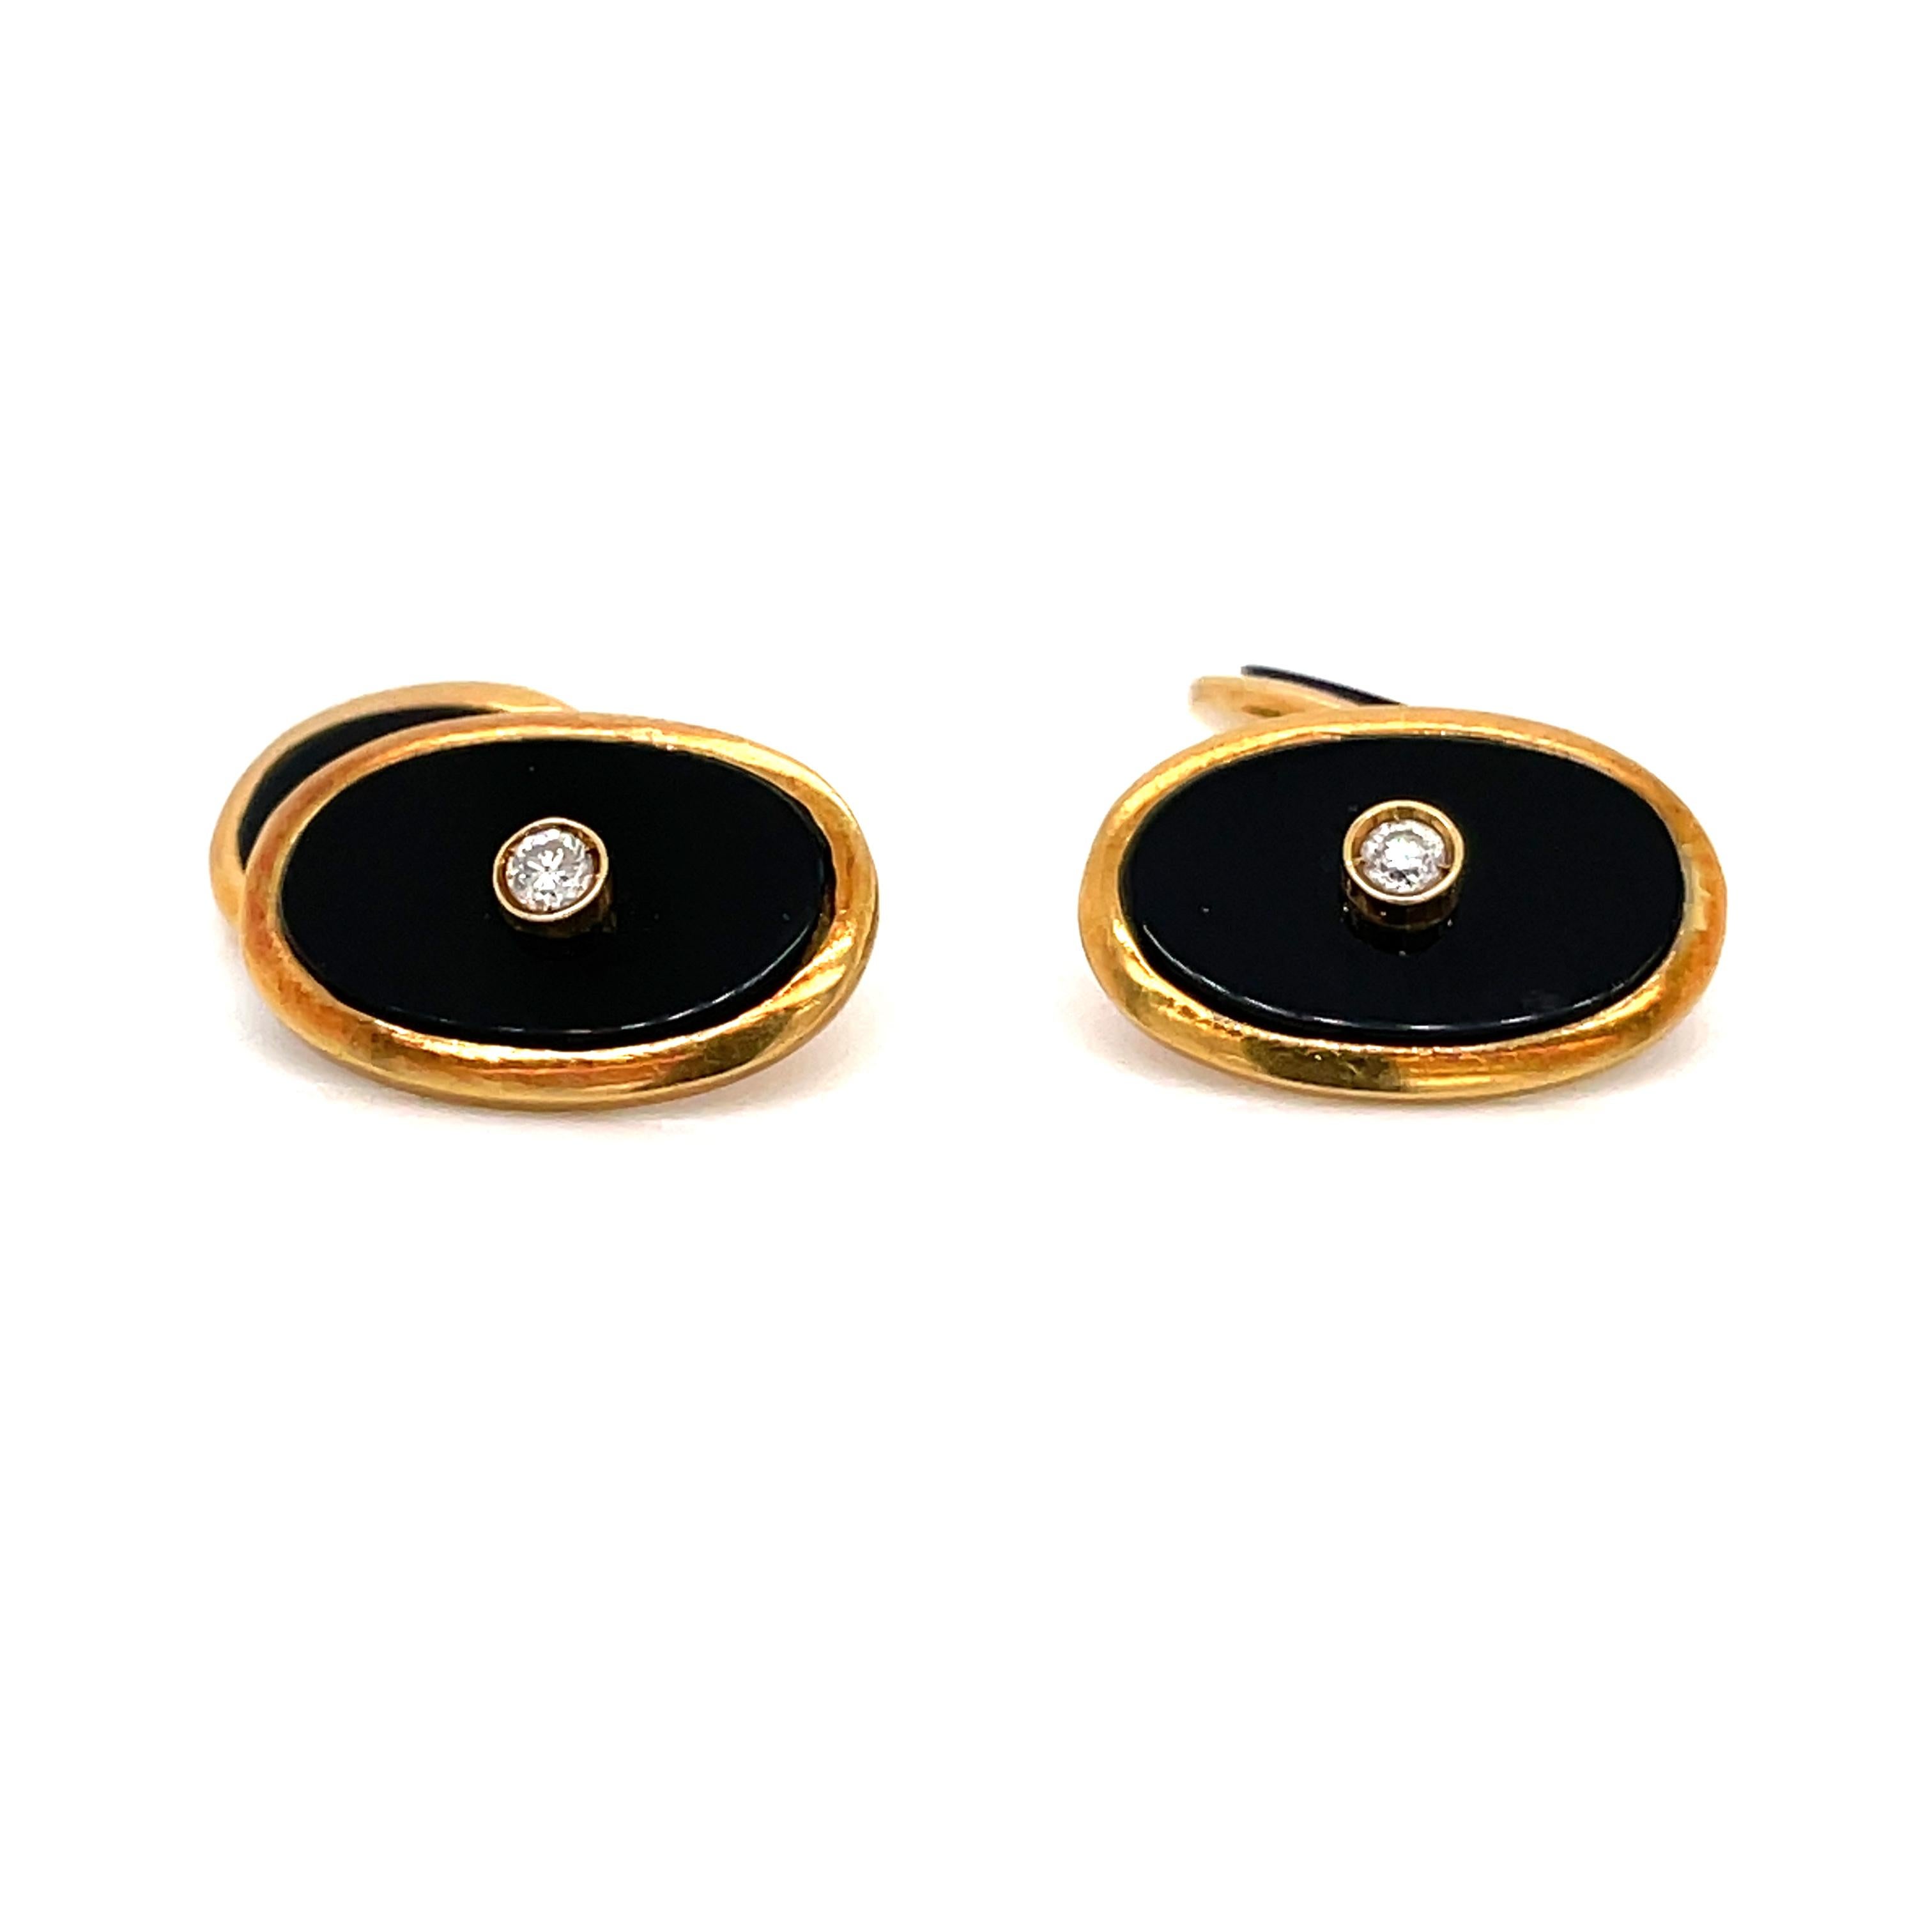 Elegant estate Italian Leo Pizzo Cufflinks, made of solid 18k yellow gold, onyx and set with Diamonds

Metal: 18k yellow gold
Signature: Leo Pizzo
Gross Weight: 6,5 grams

Excellent condition, 100% authenticity guarantee